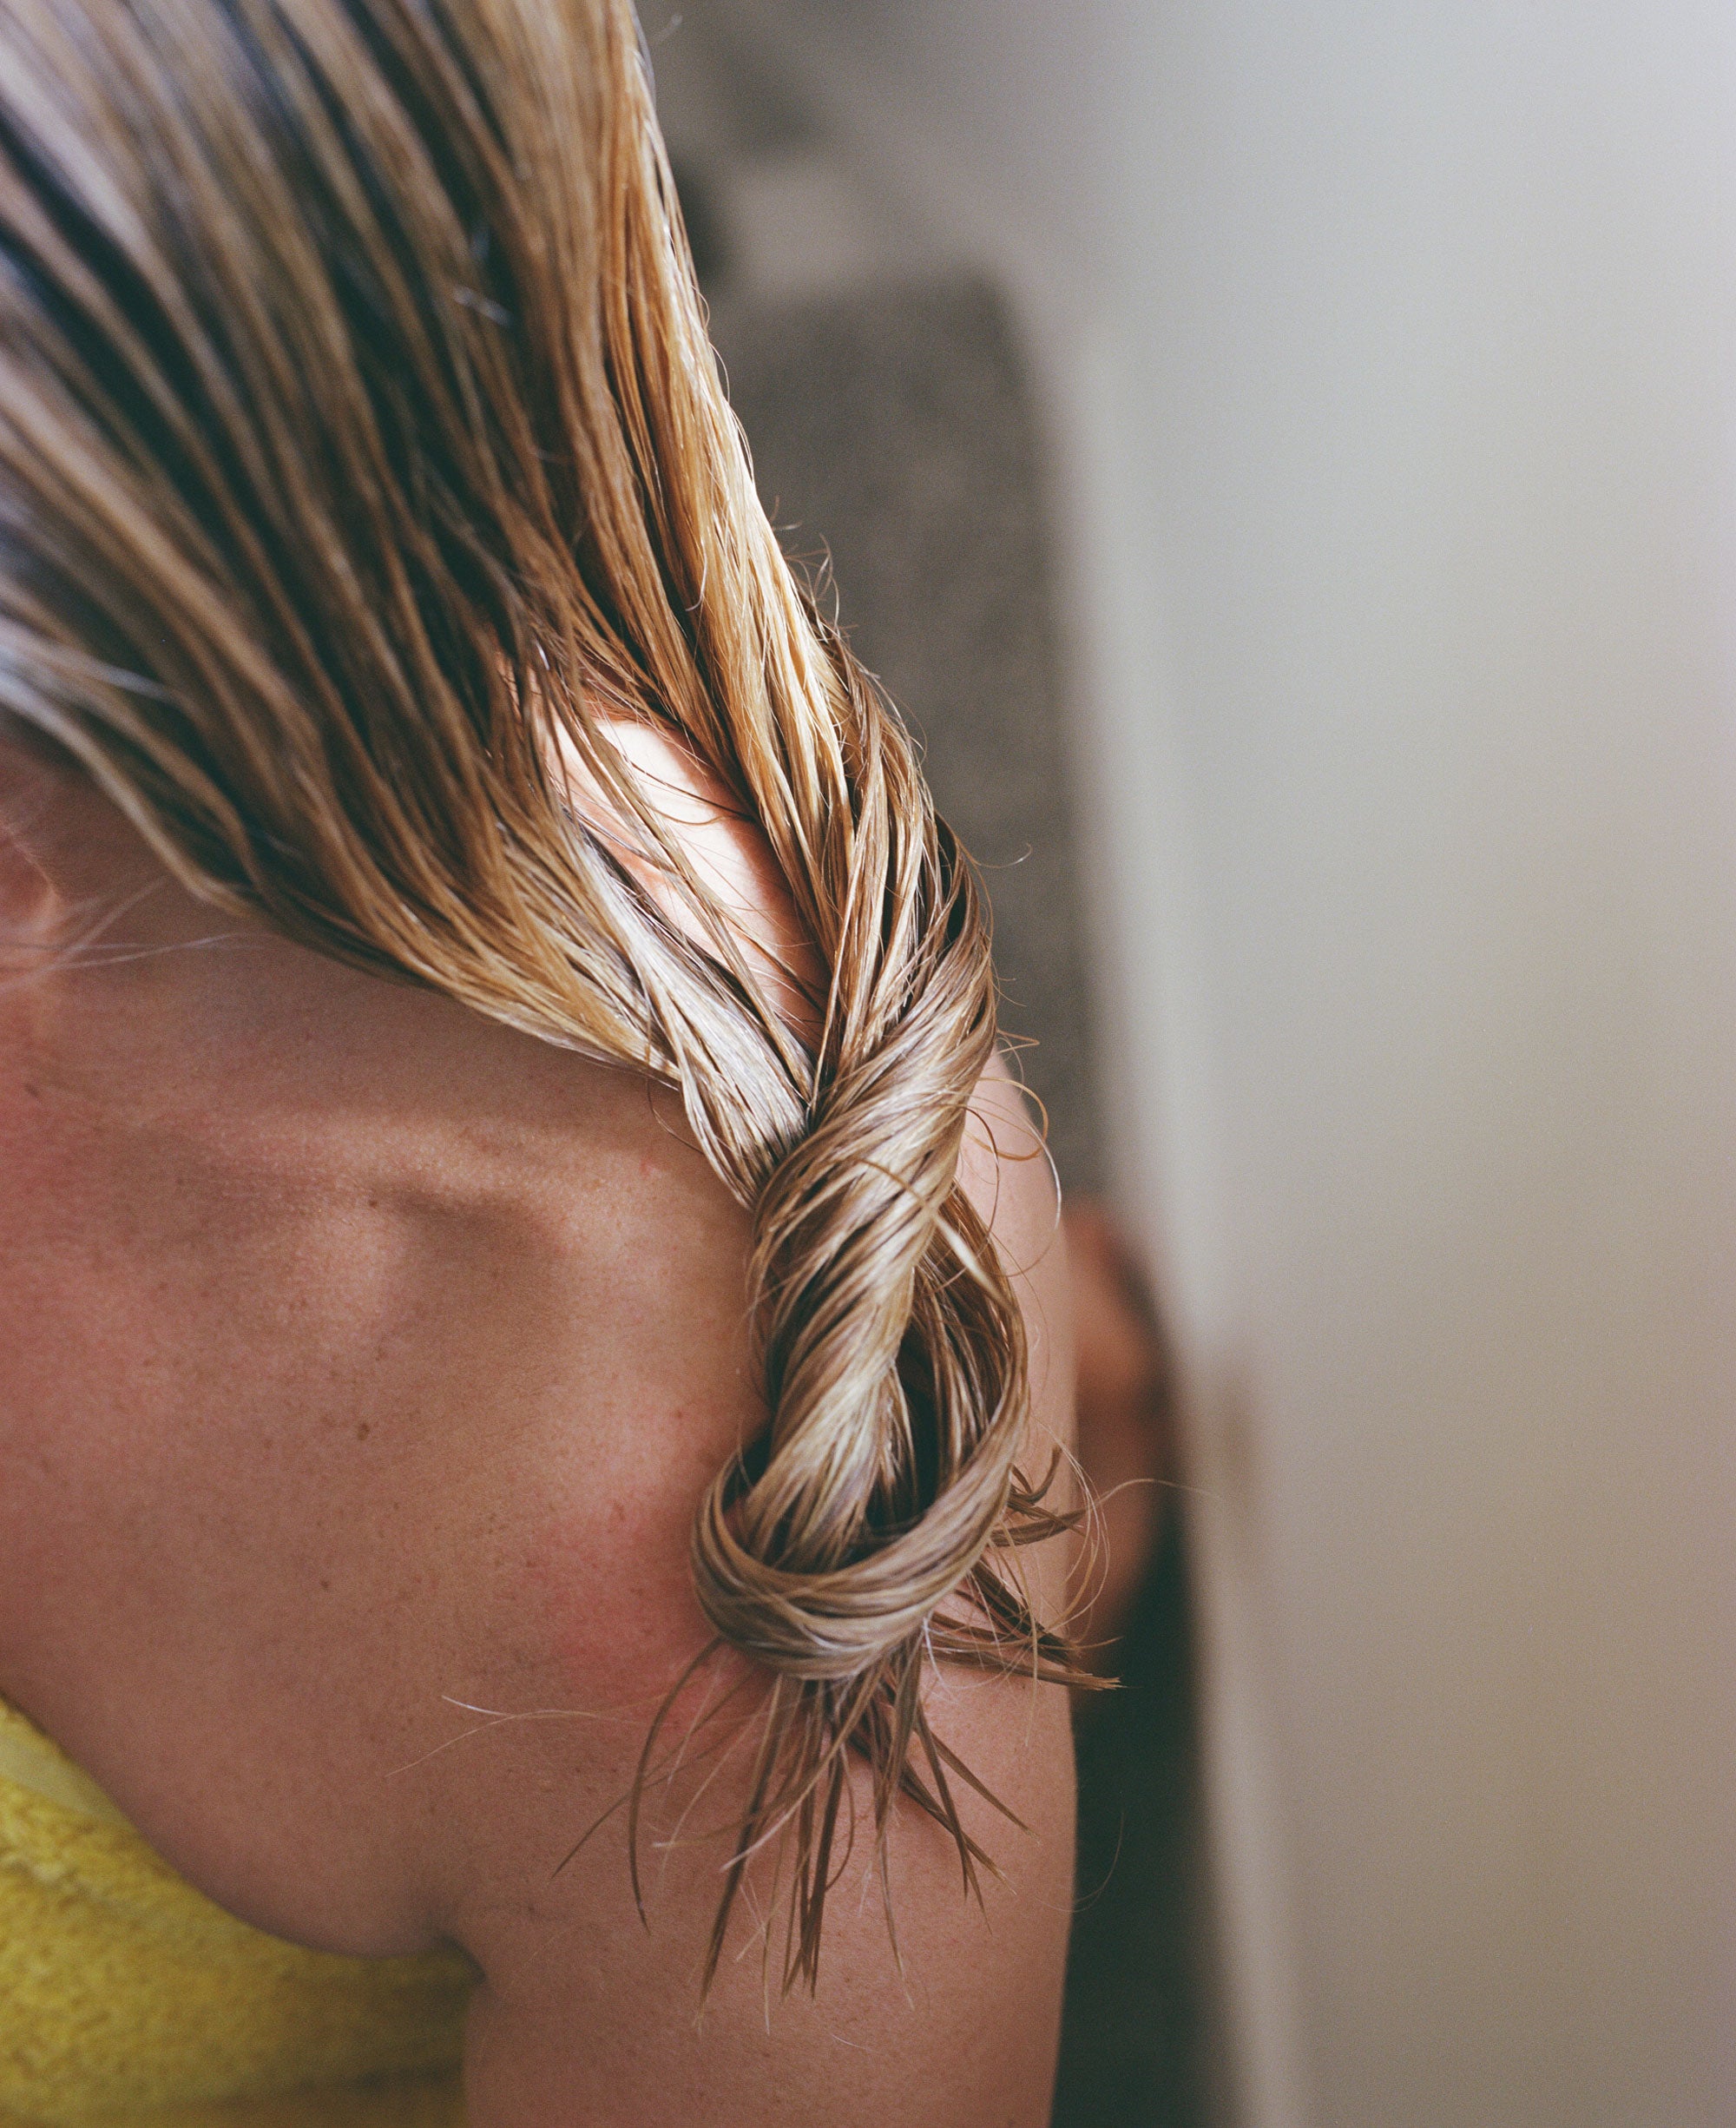 Should You Wash Your Hair After Every Workout?